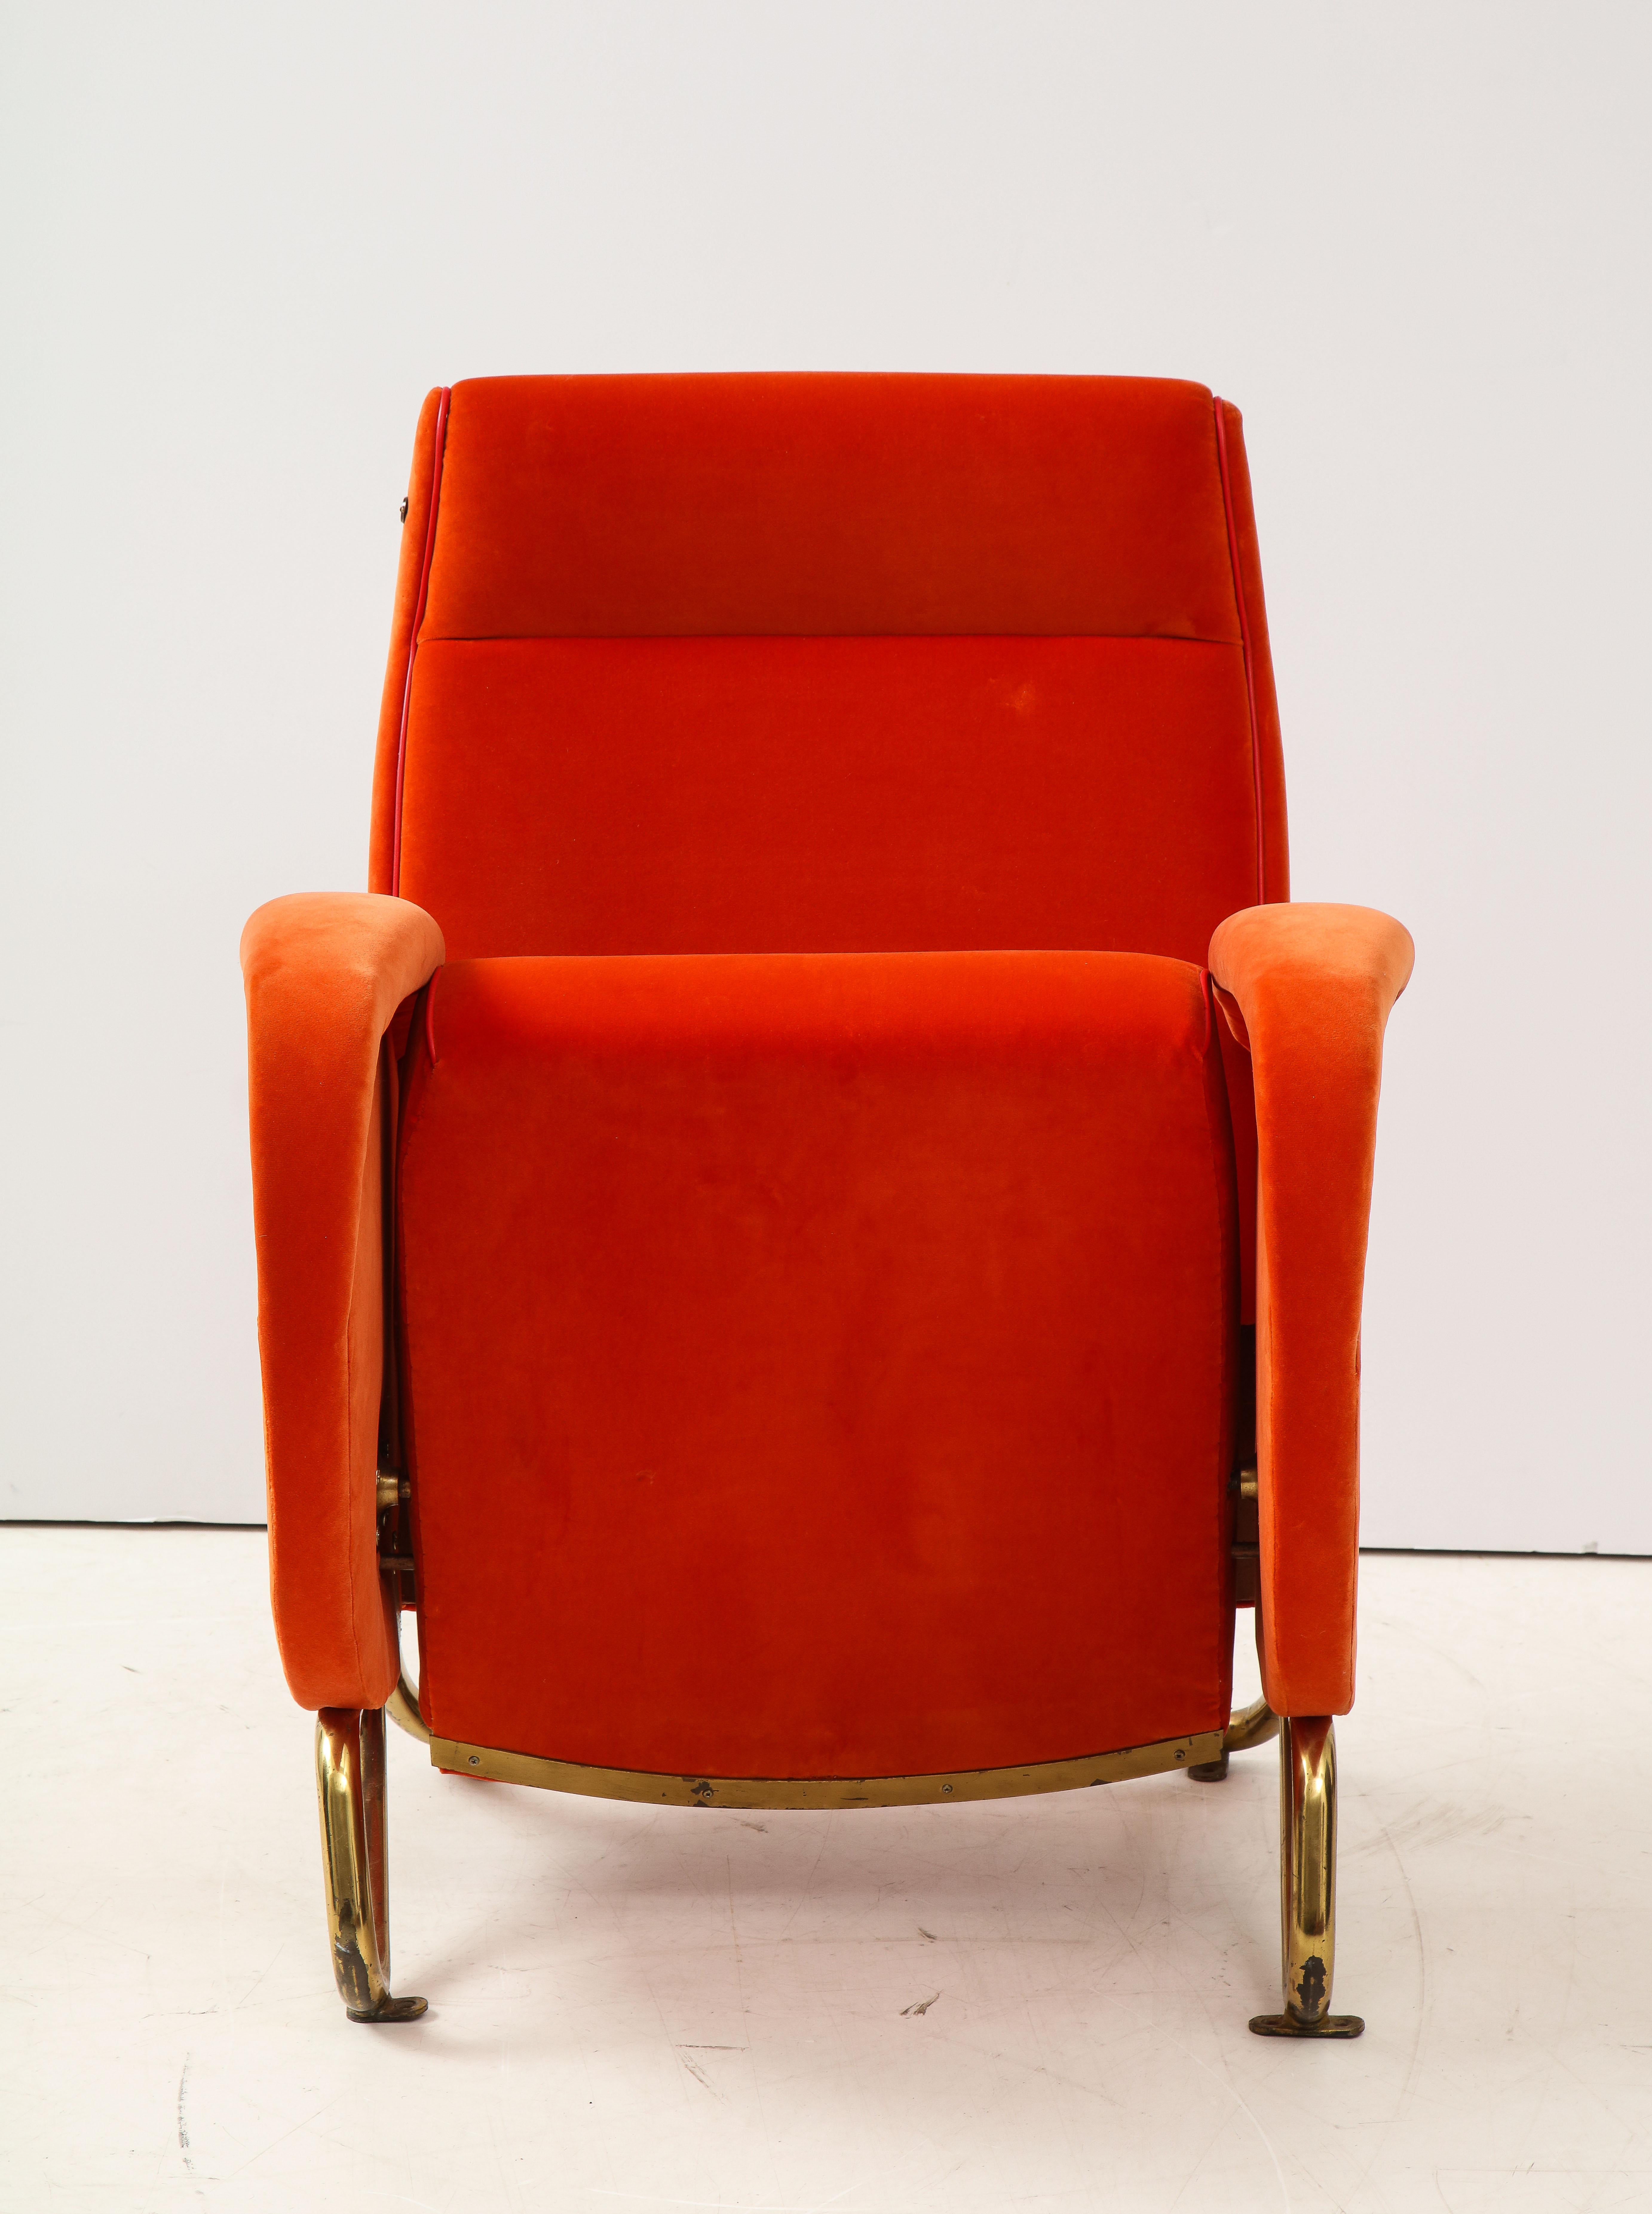 Carlo Mollino, Brass and Velvet Armchair from the RAI Auditorium, Italy, c. 1951 For Sale 3